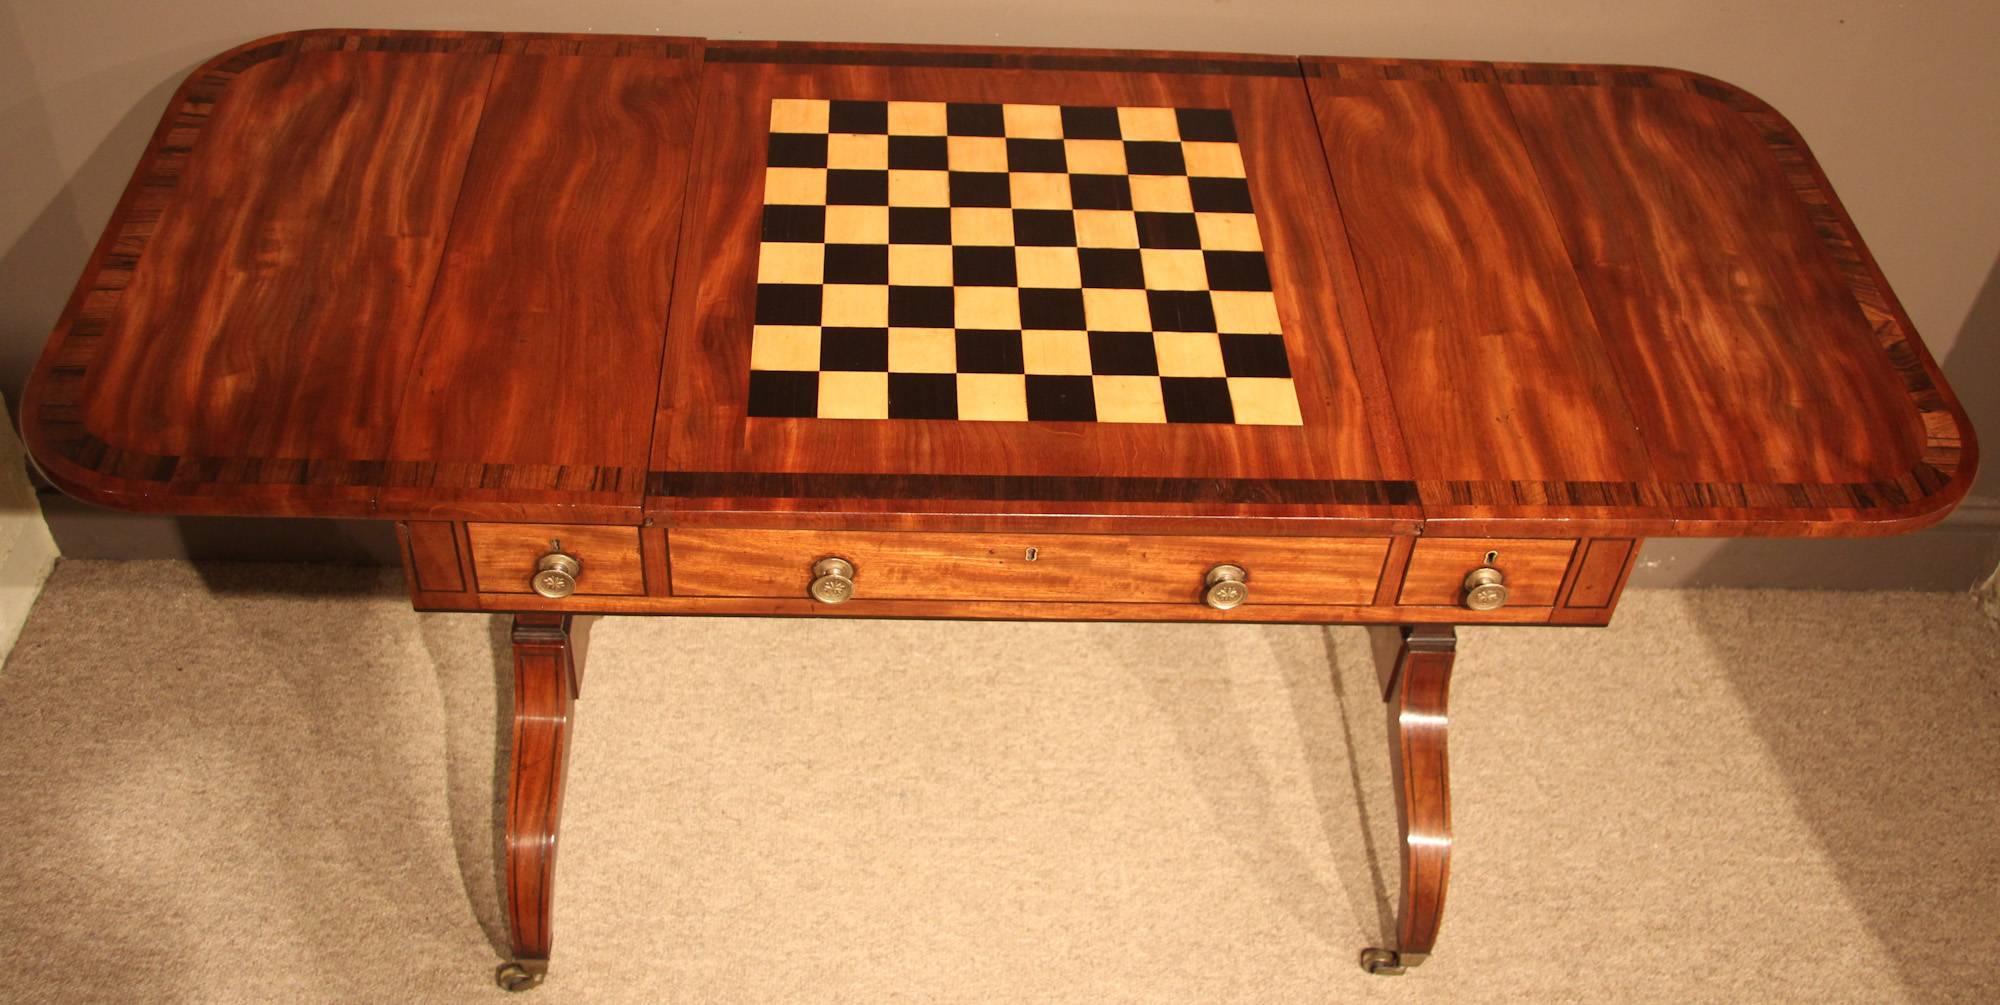 A fine quality period mahogany games or sofa table with original backgammon board and chess board, circa 1820. Label from W.H Jewell Holborn, London.

All of the items that we advertise for sale have been as accurately described as possible and